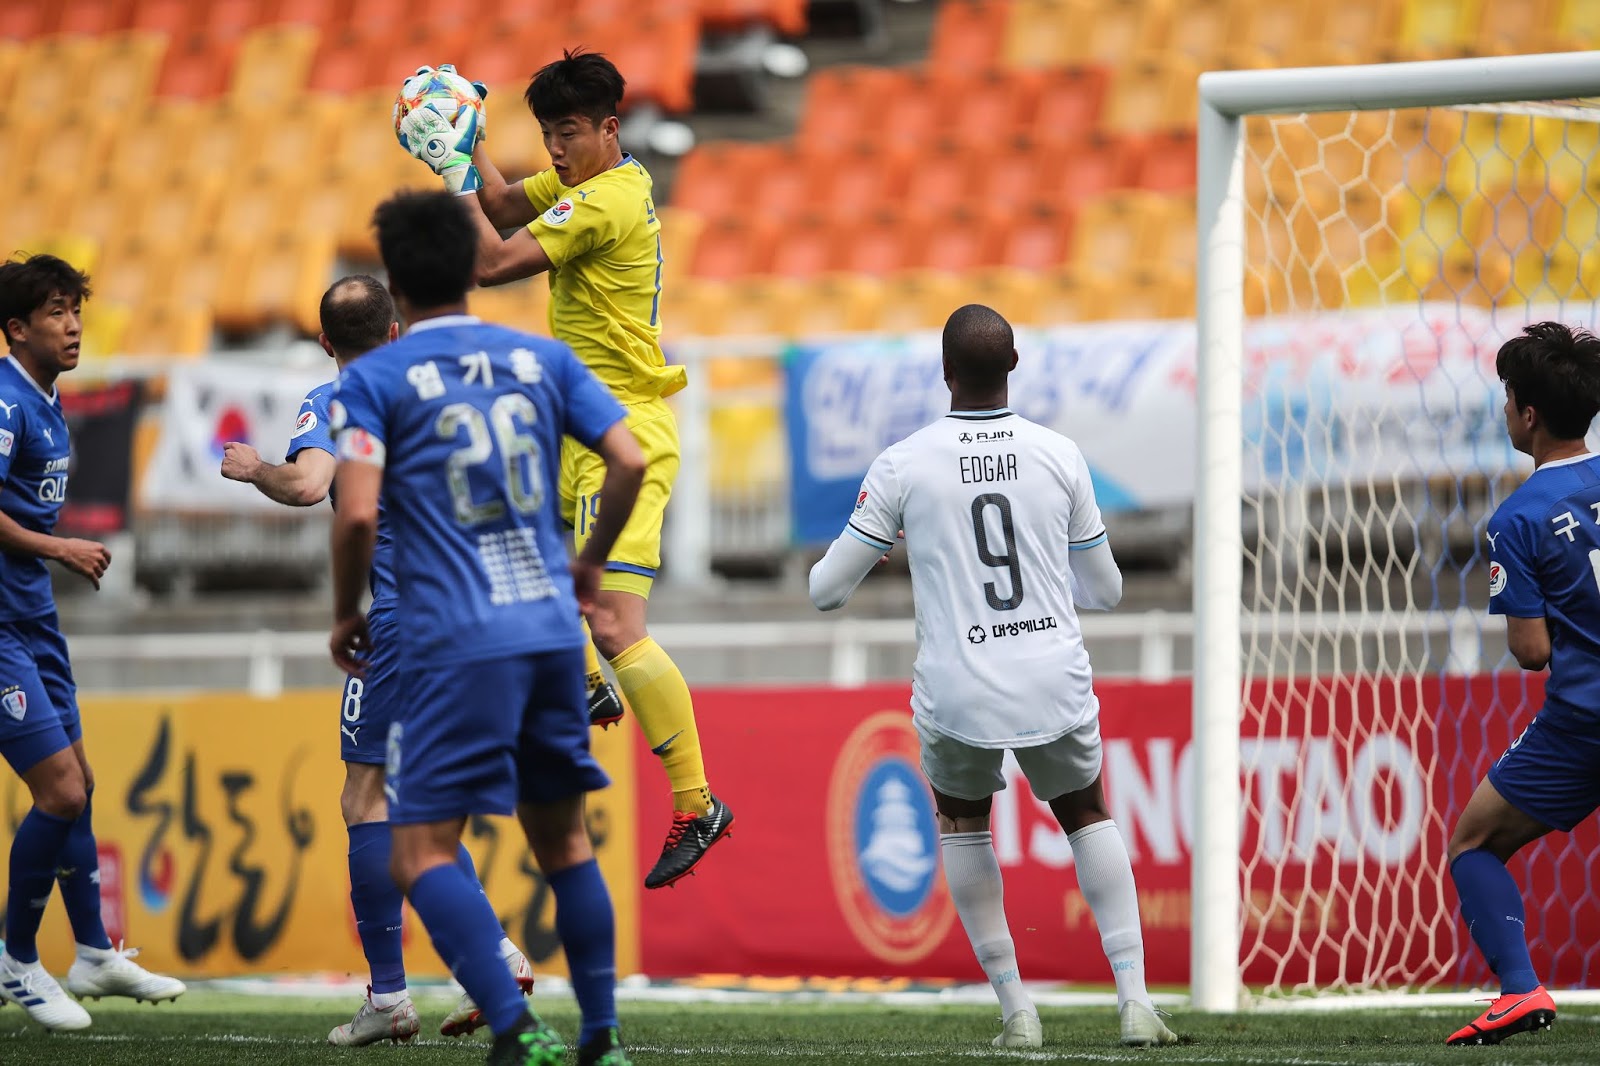 FA Cup Preview: Suwon Bluewings vs Pohang Steelers - K League United |  South Korean football news, opinions, match previews and score predictions